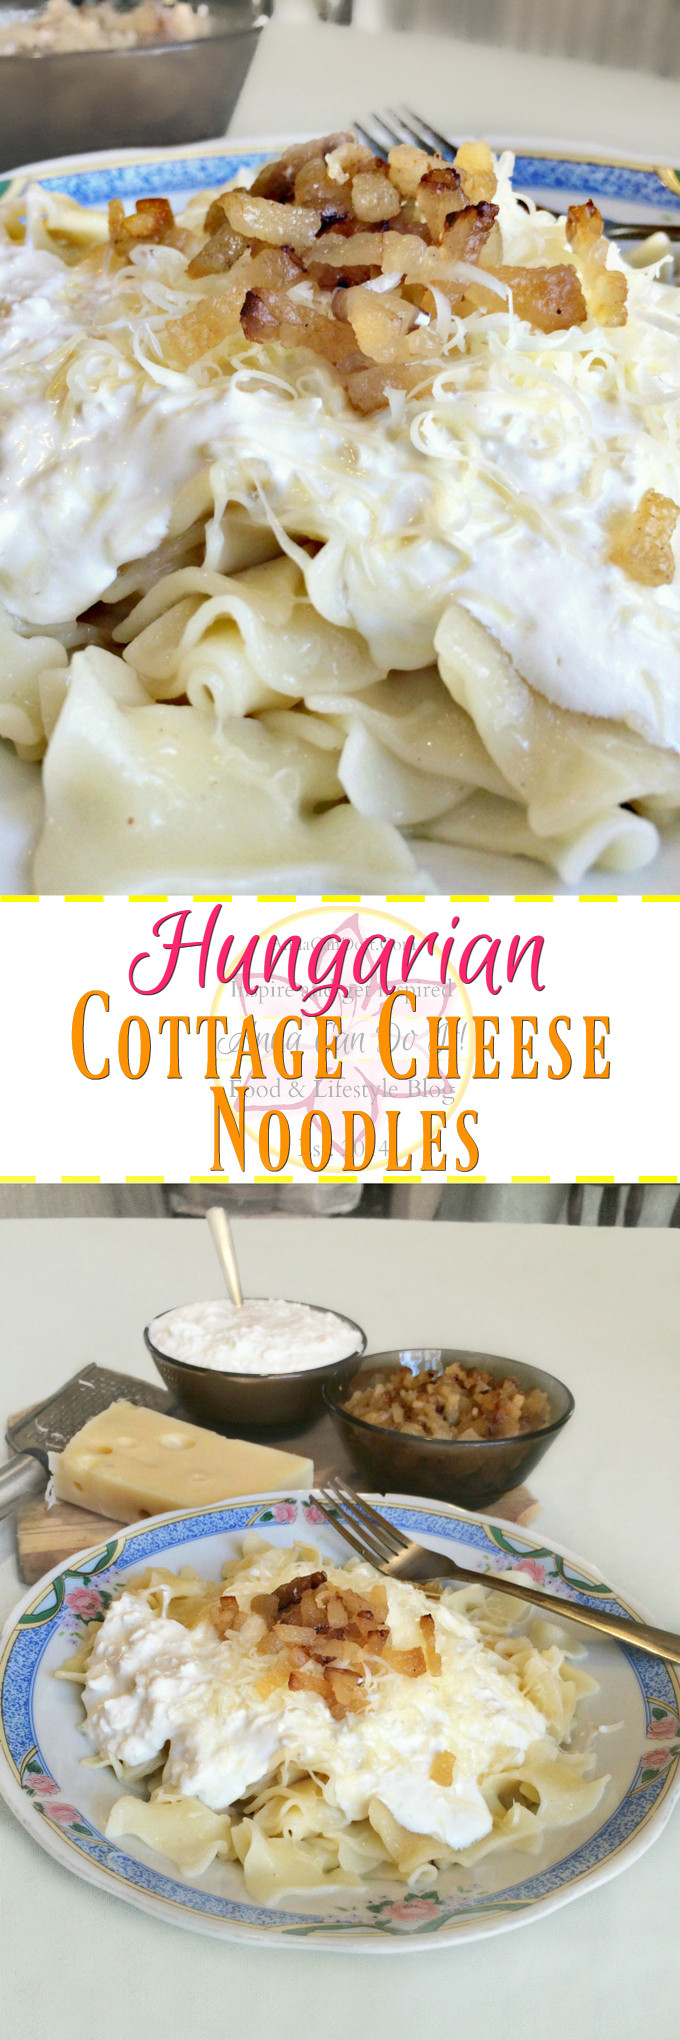 Cottage Cheese And Noodles
 Hungarian Cottage Cheese Noodles